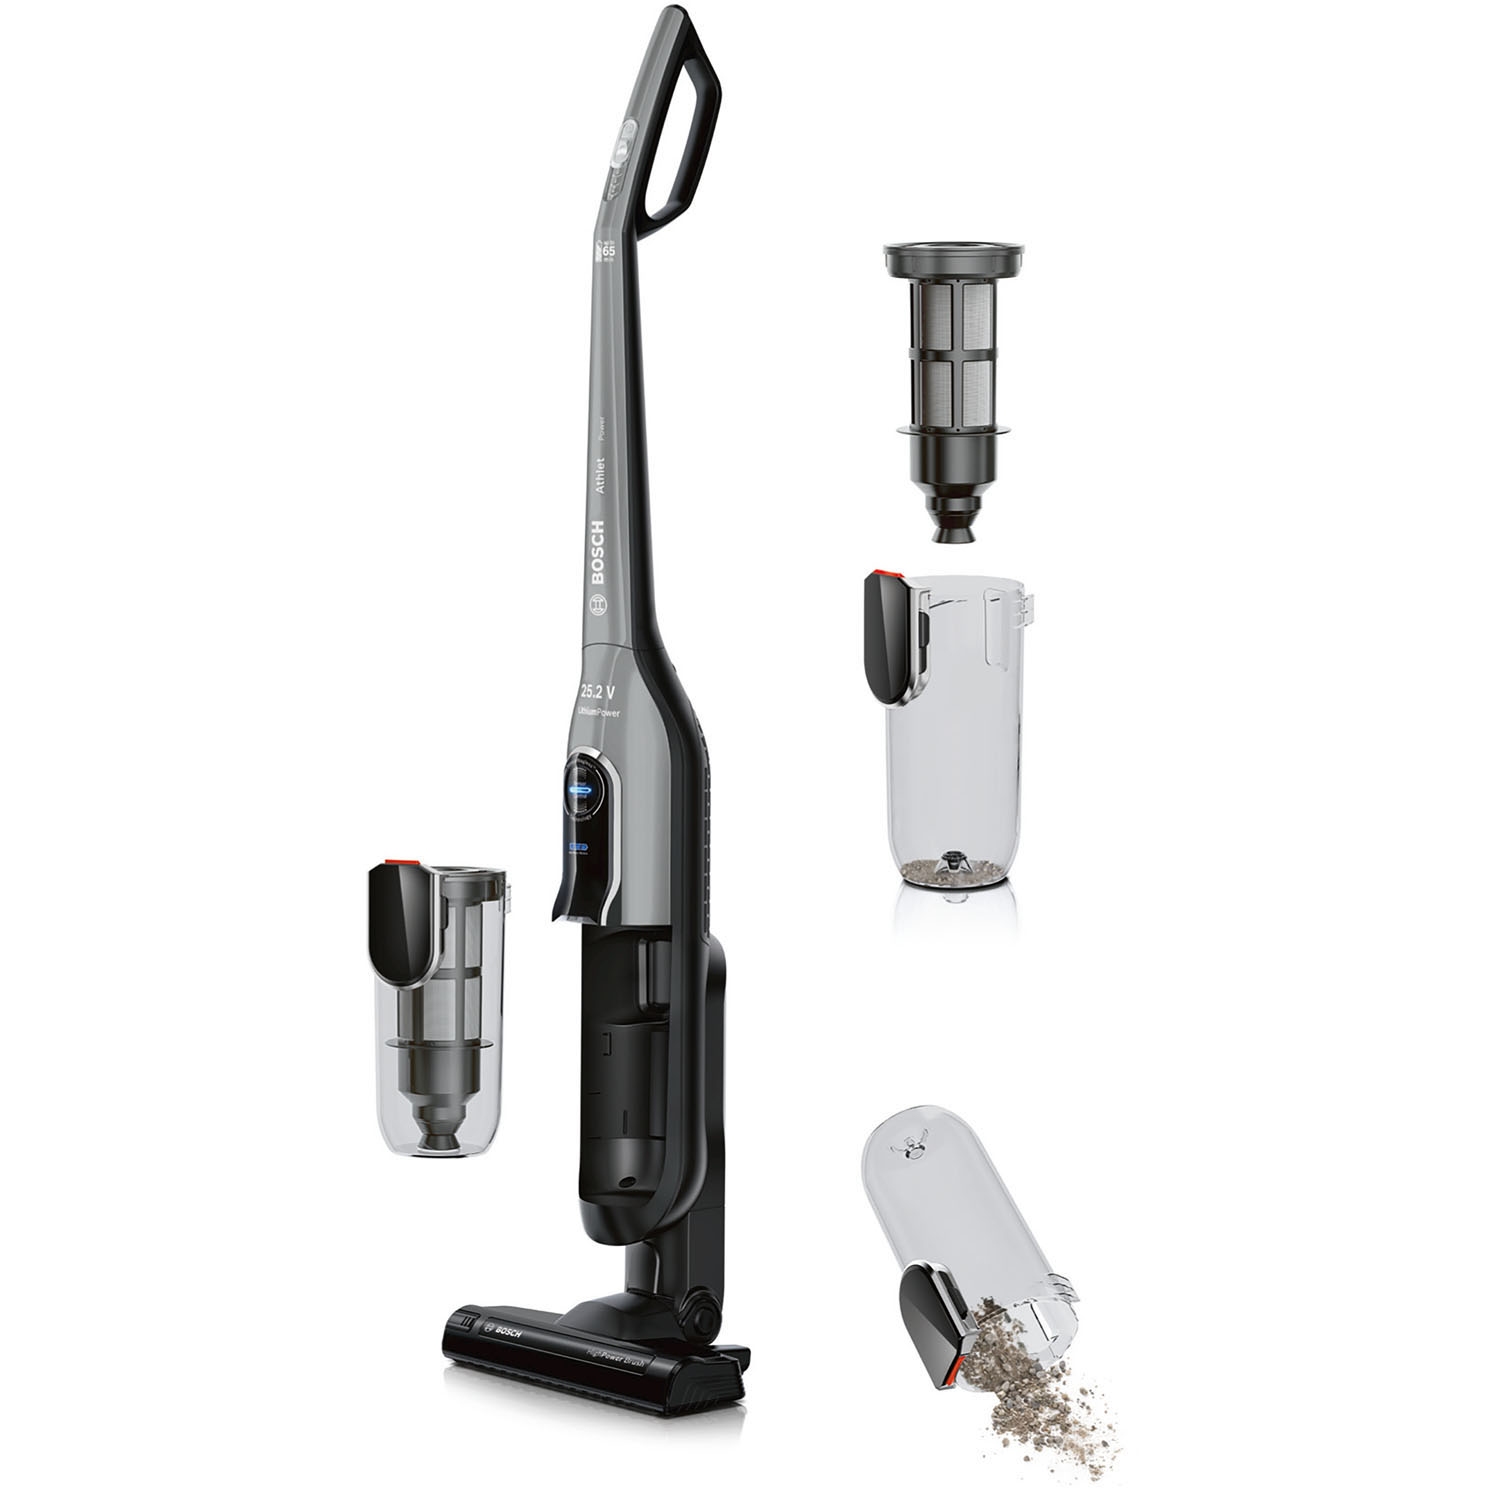 Bosch Athlet Vacuum Cleaner - 65 Minute Run Time - 5